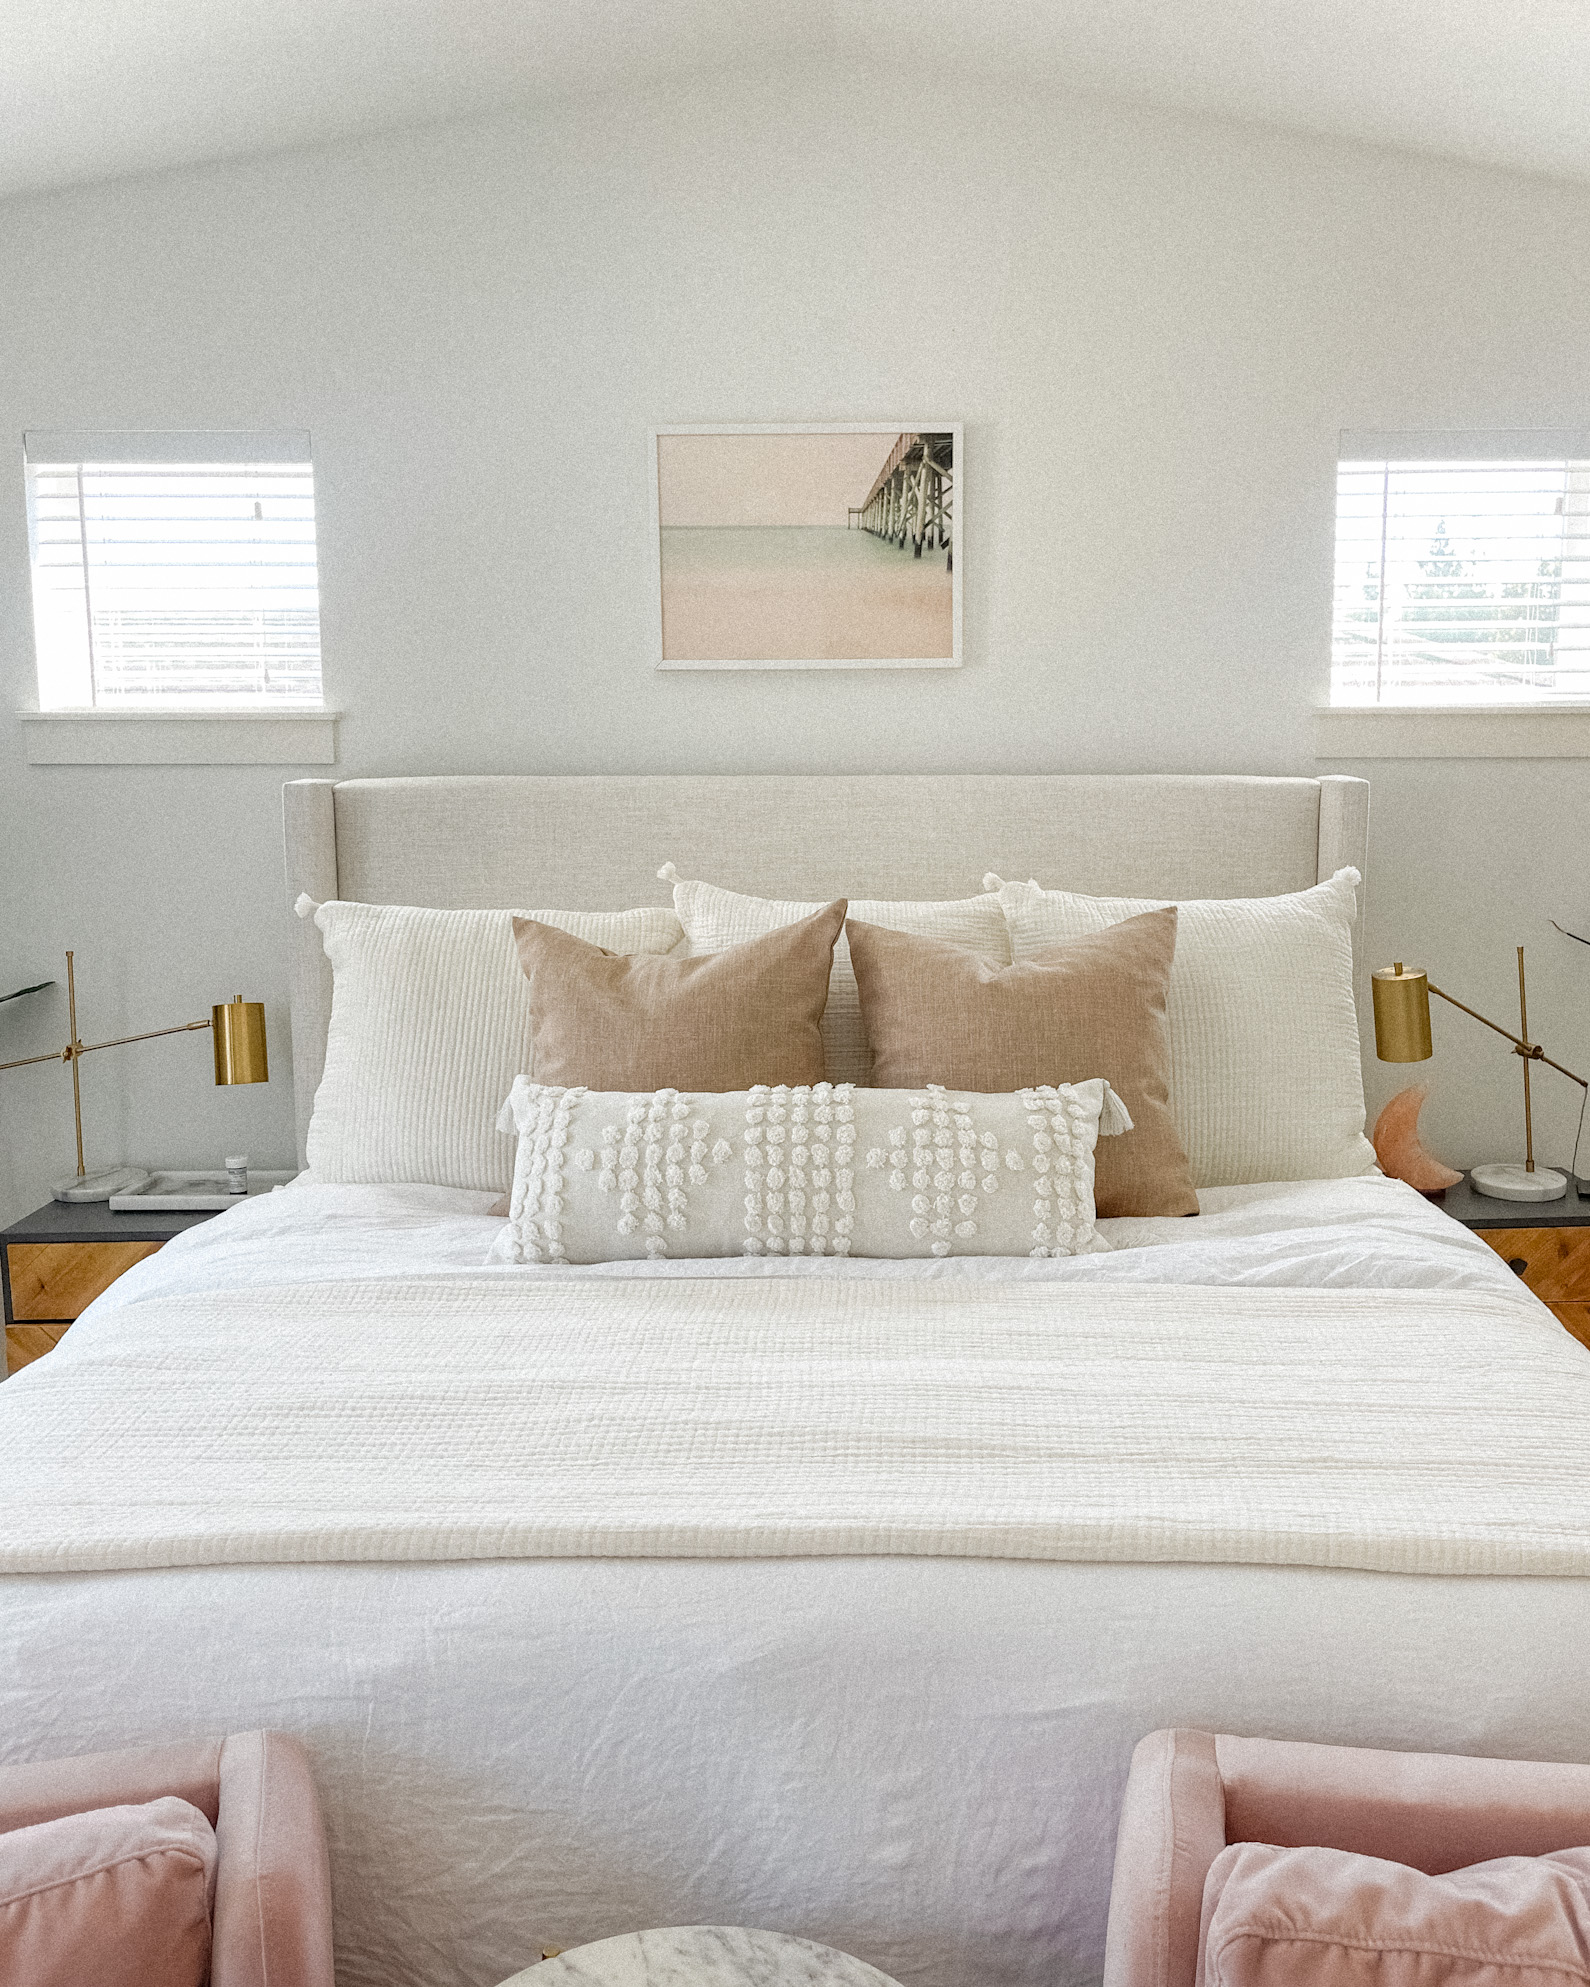 How To Arrange Pillows On A King Bed, Pillows For King Bed